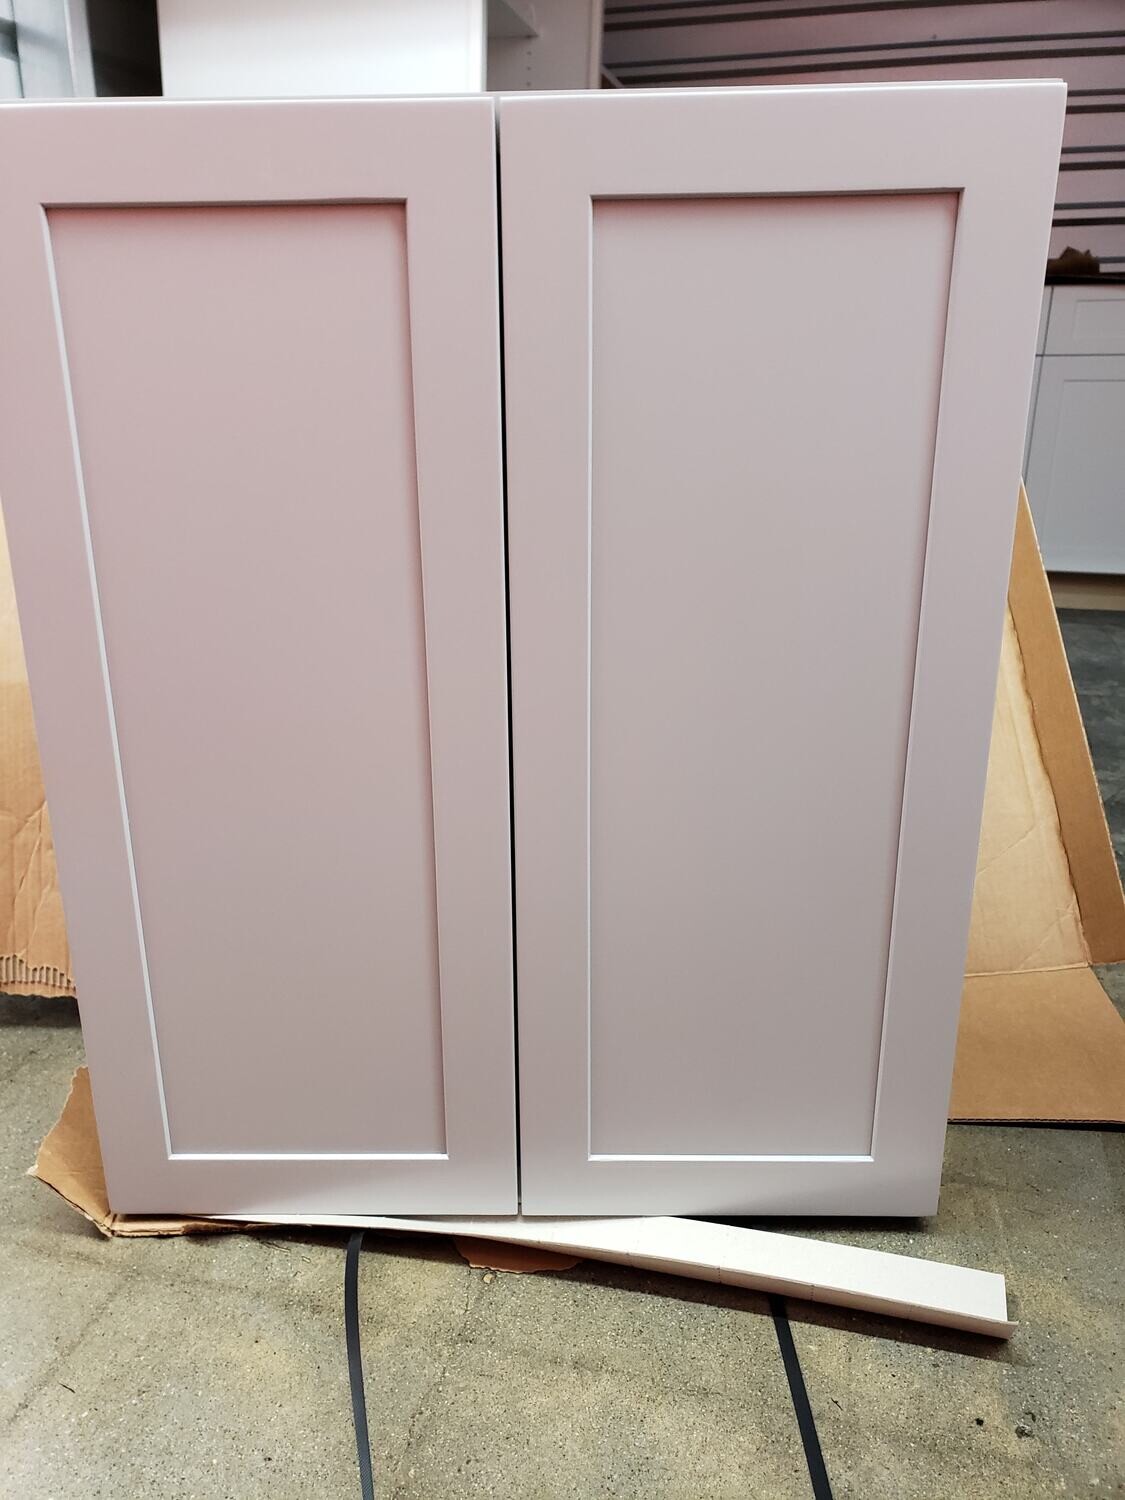 13 - New Kitchen Wall cabinet, gray 30x36 #1266